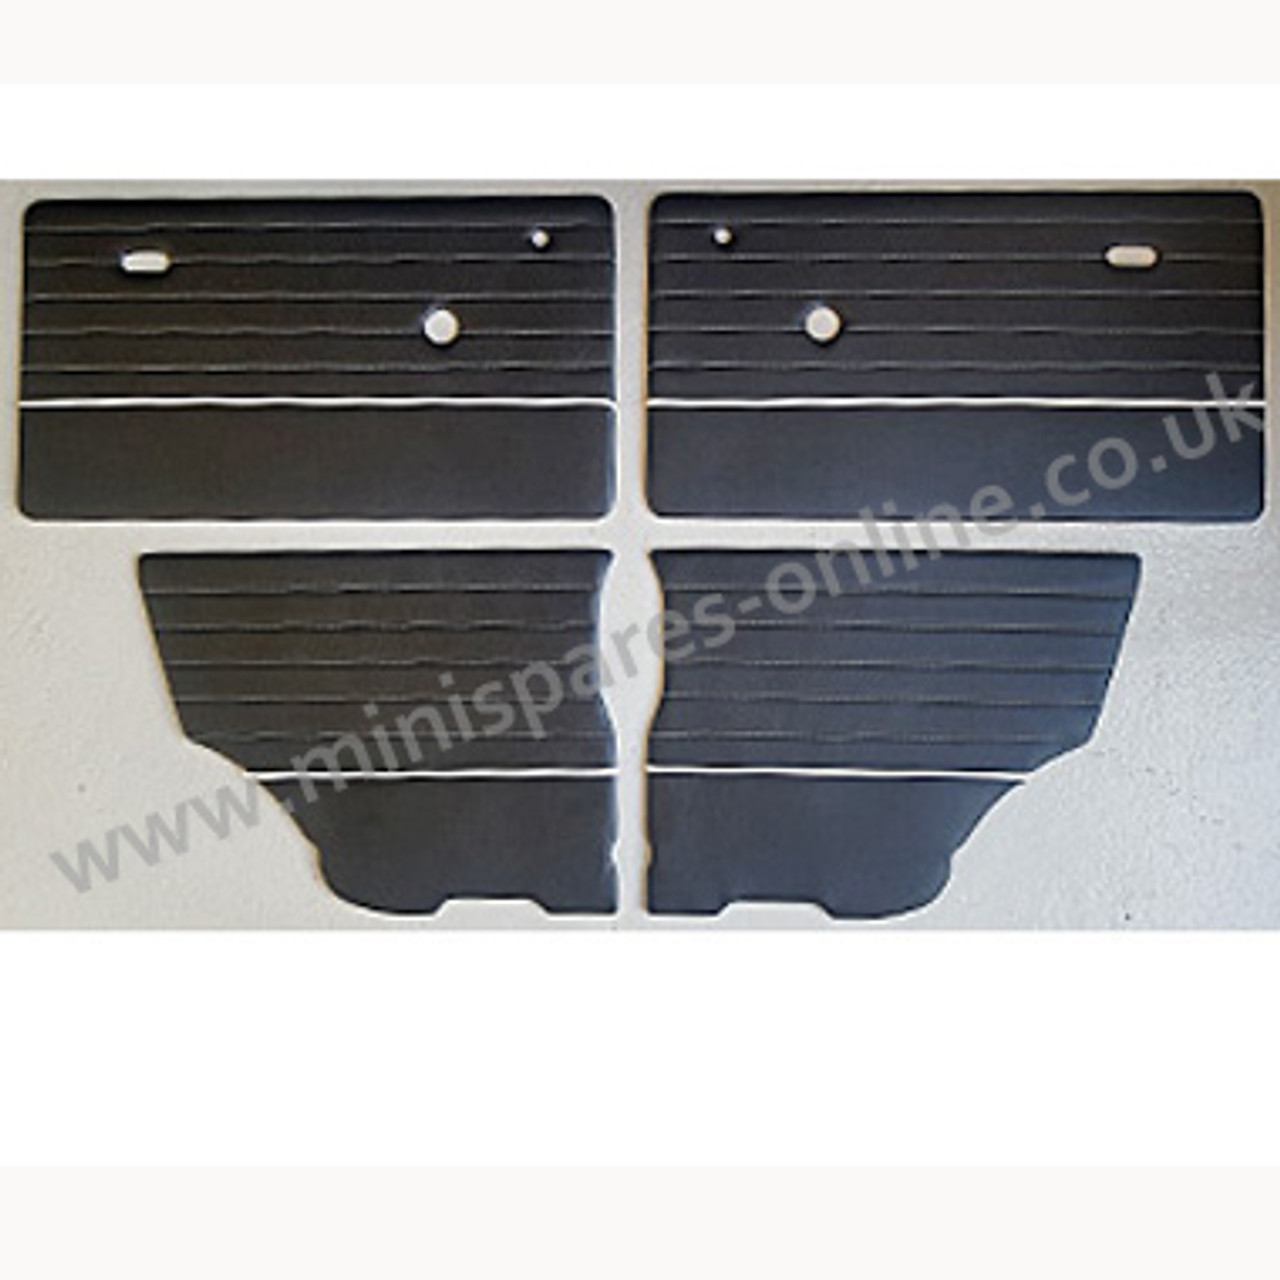 Quality Black stitched and piped white vinyl door cards for classic Mini